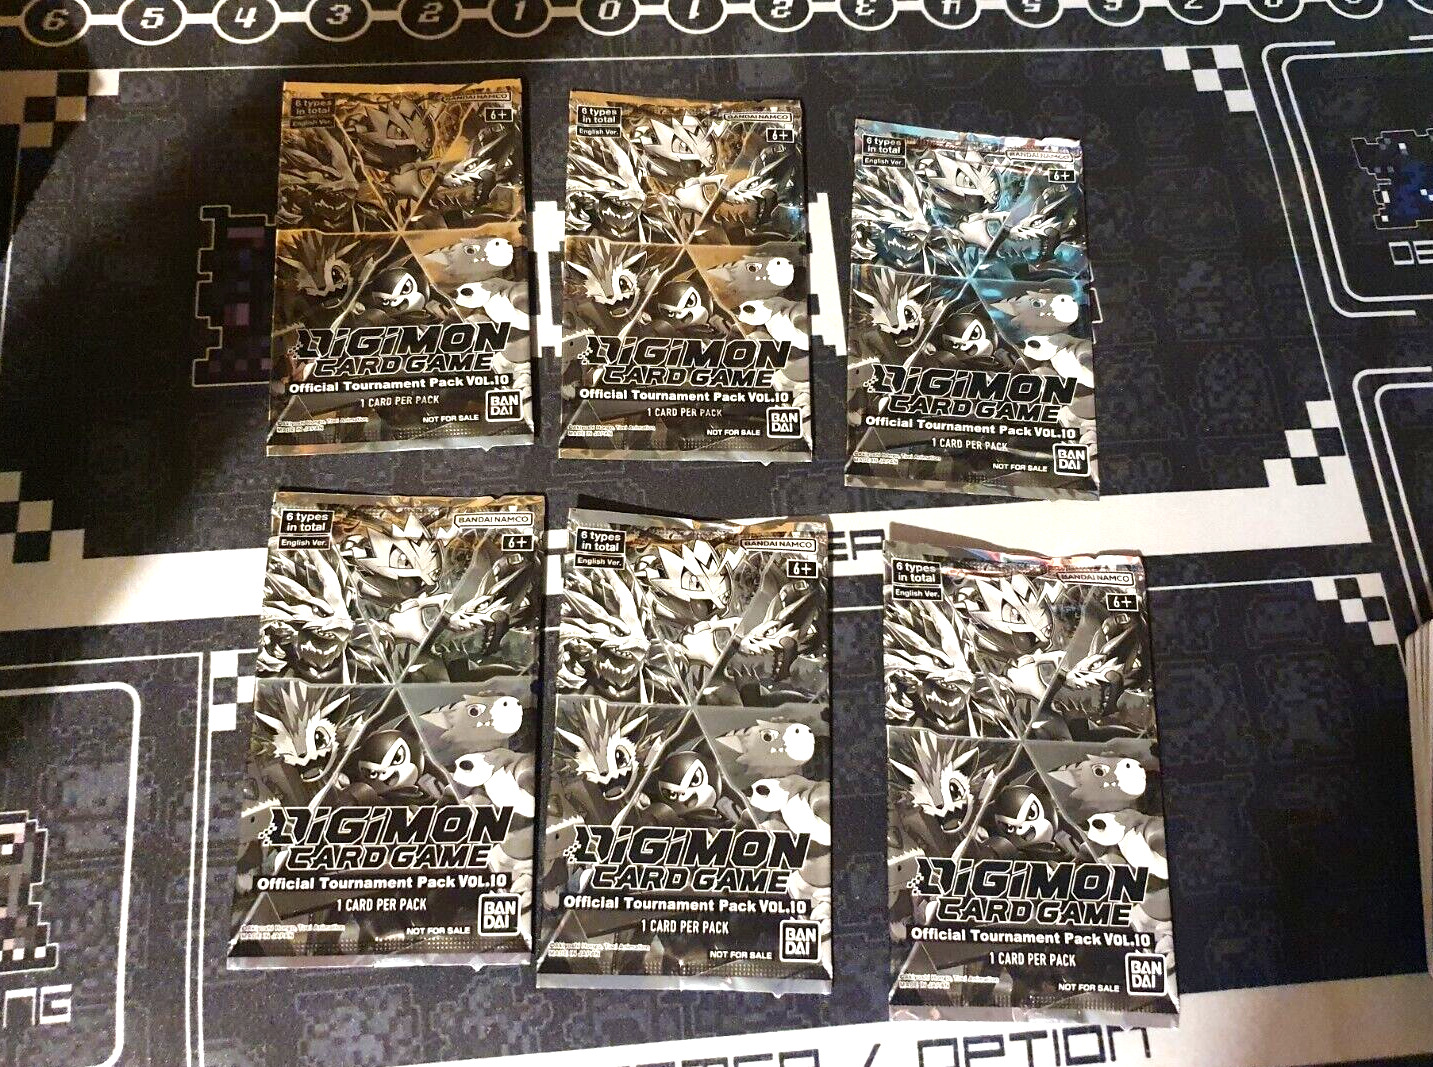 Digimon Official Tournament Pack Vol 10 x6 Sealed Packs